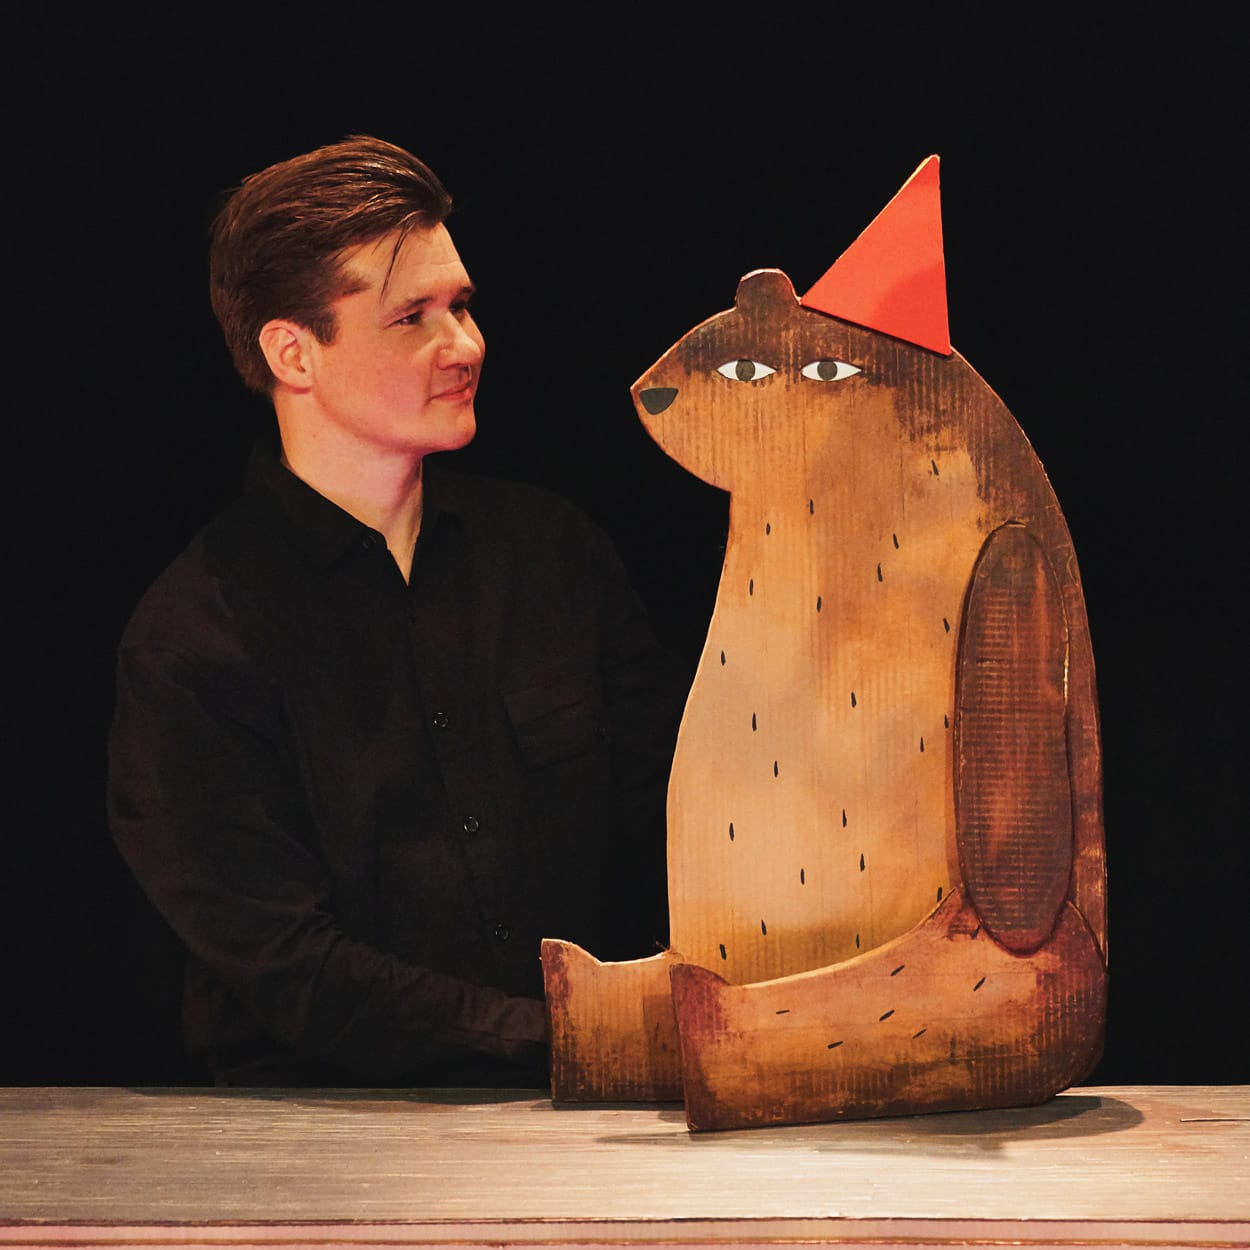 A performer on stage in I Want My Hat Back Trilogy. He is wearing black and holding a cardboard puppet of a bear wearing a hat.